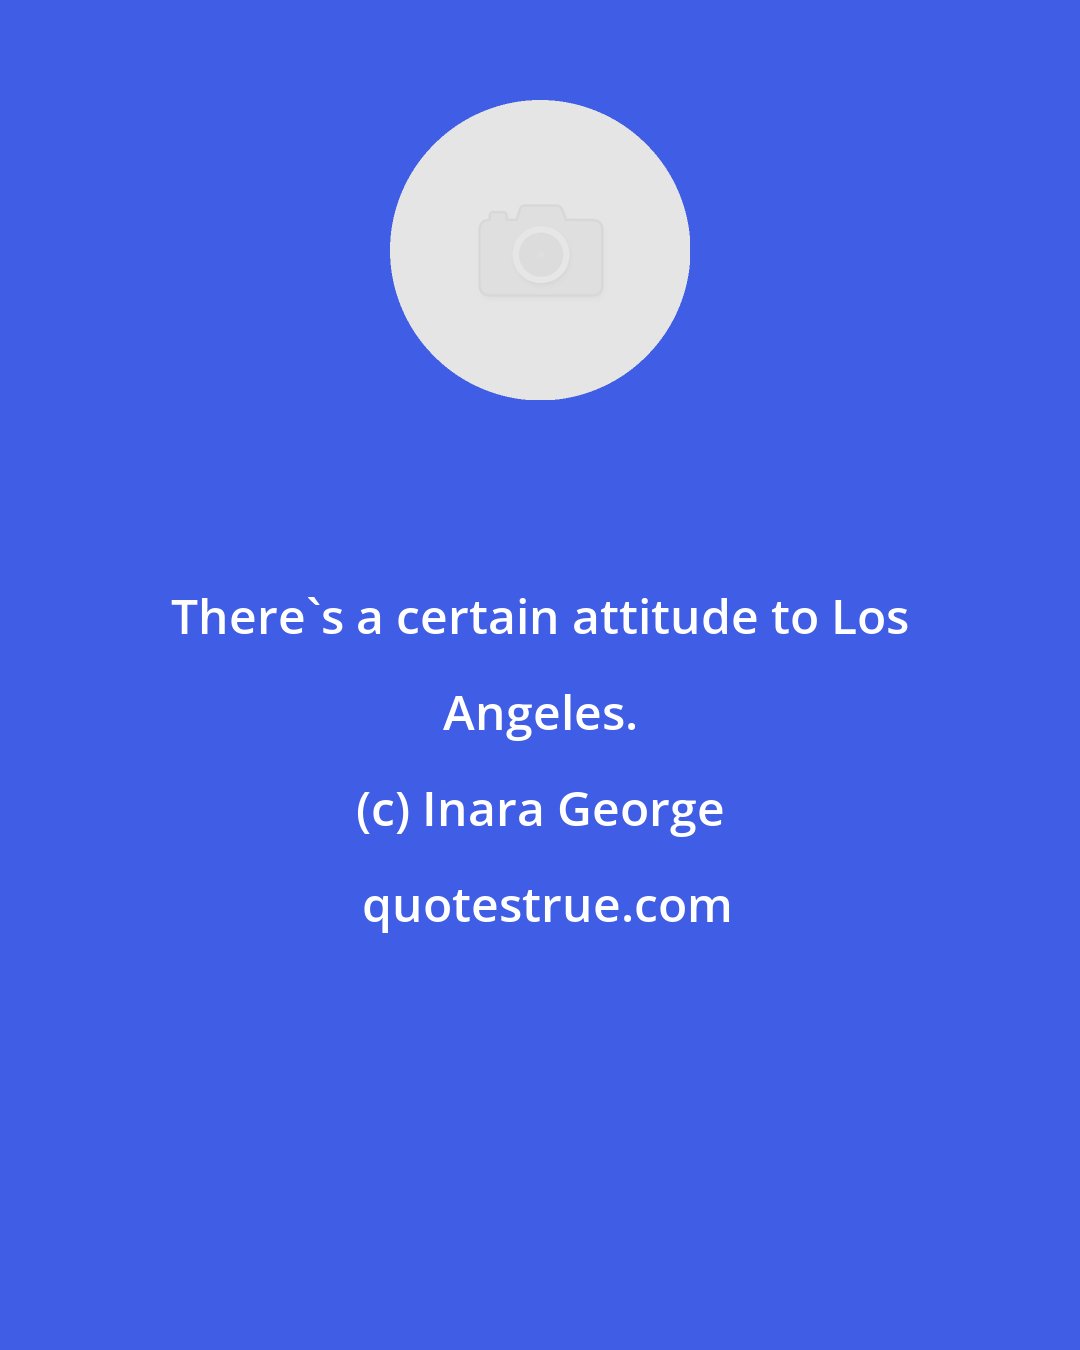 Inara George: There's a certain attitude to Los Angeles.